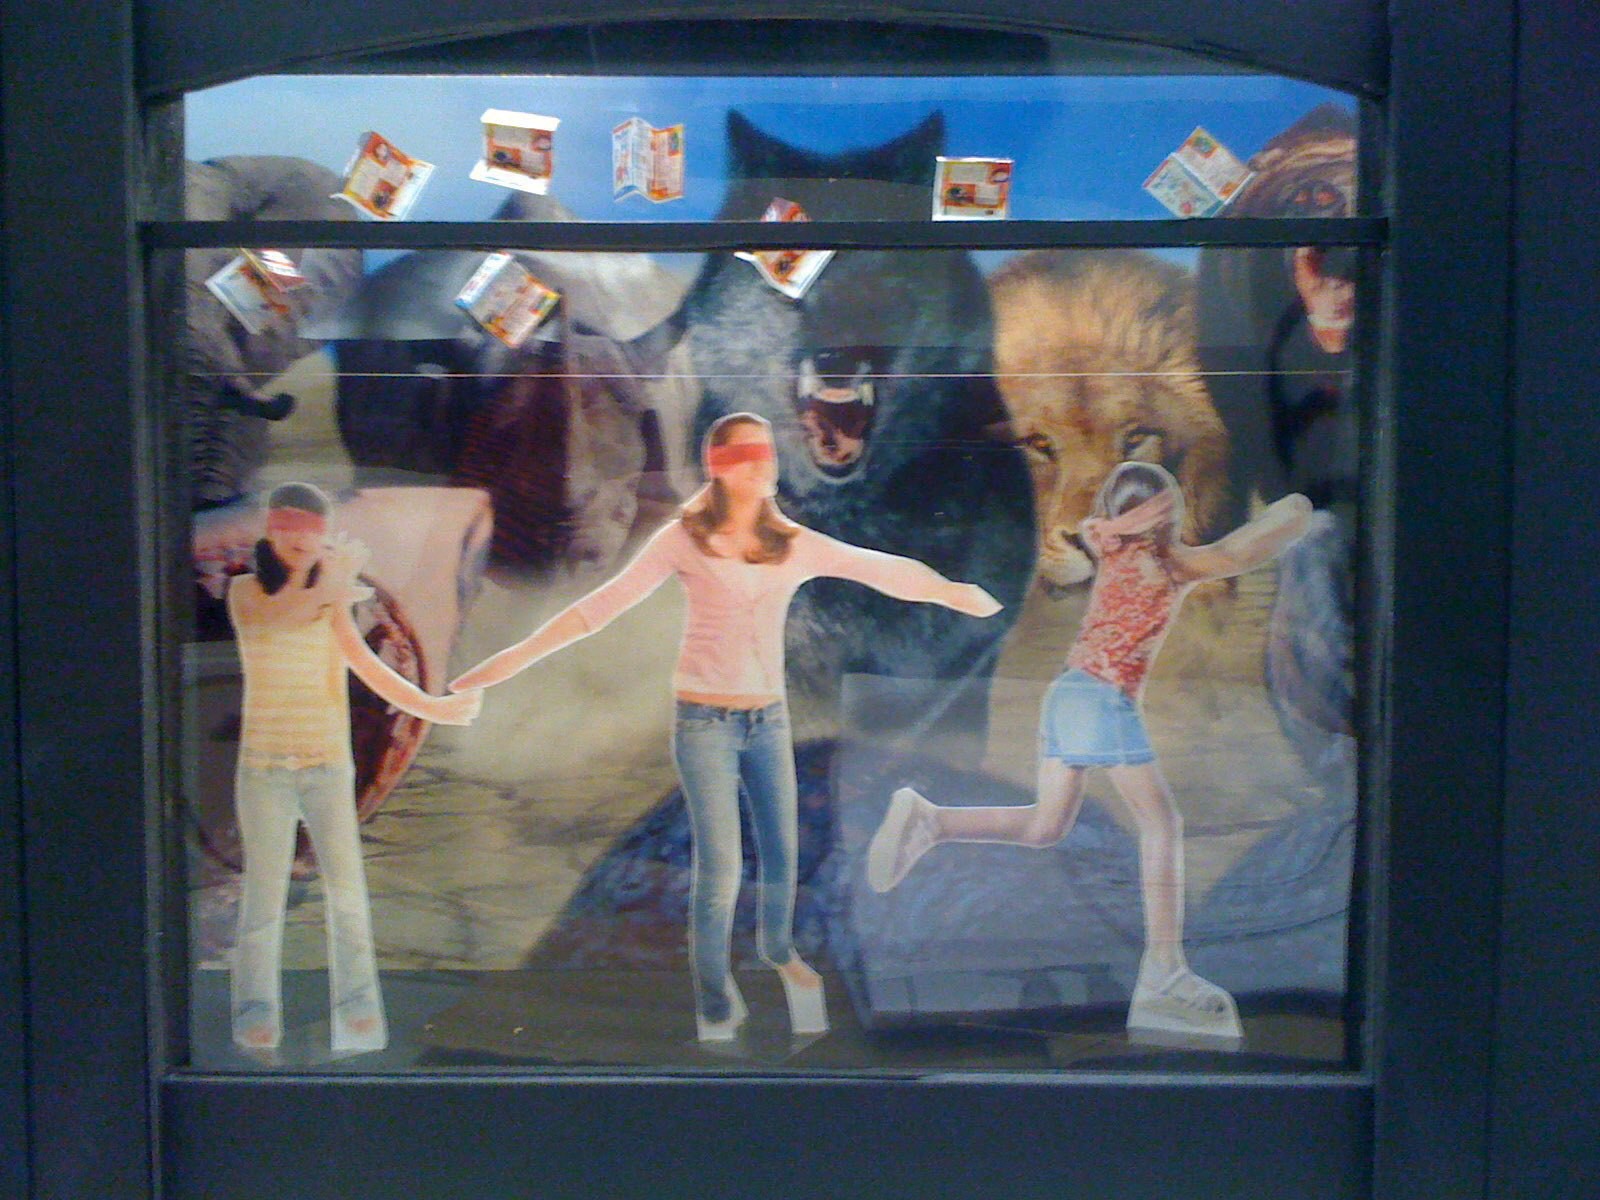 One inch scale model box of a display window. Three pre-teen girls wearing blindfolds as huge predators bear down on them and abstinence-only pamphlets fall from the sky.